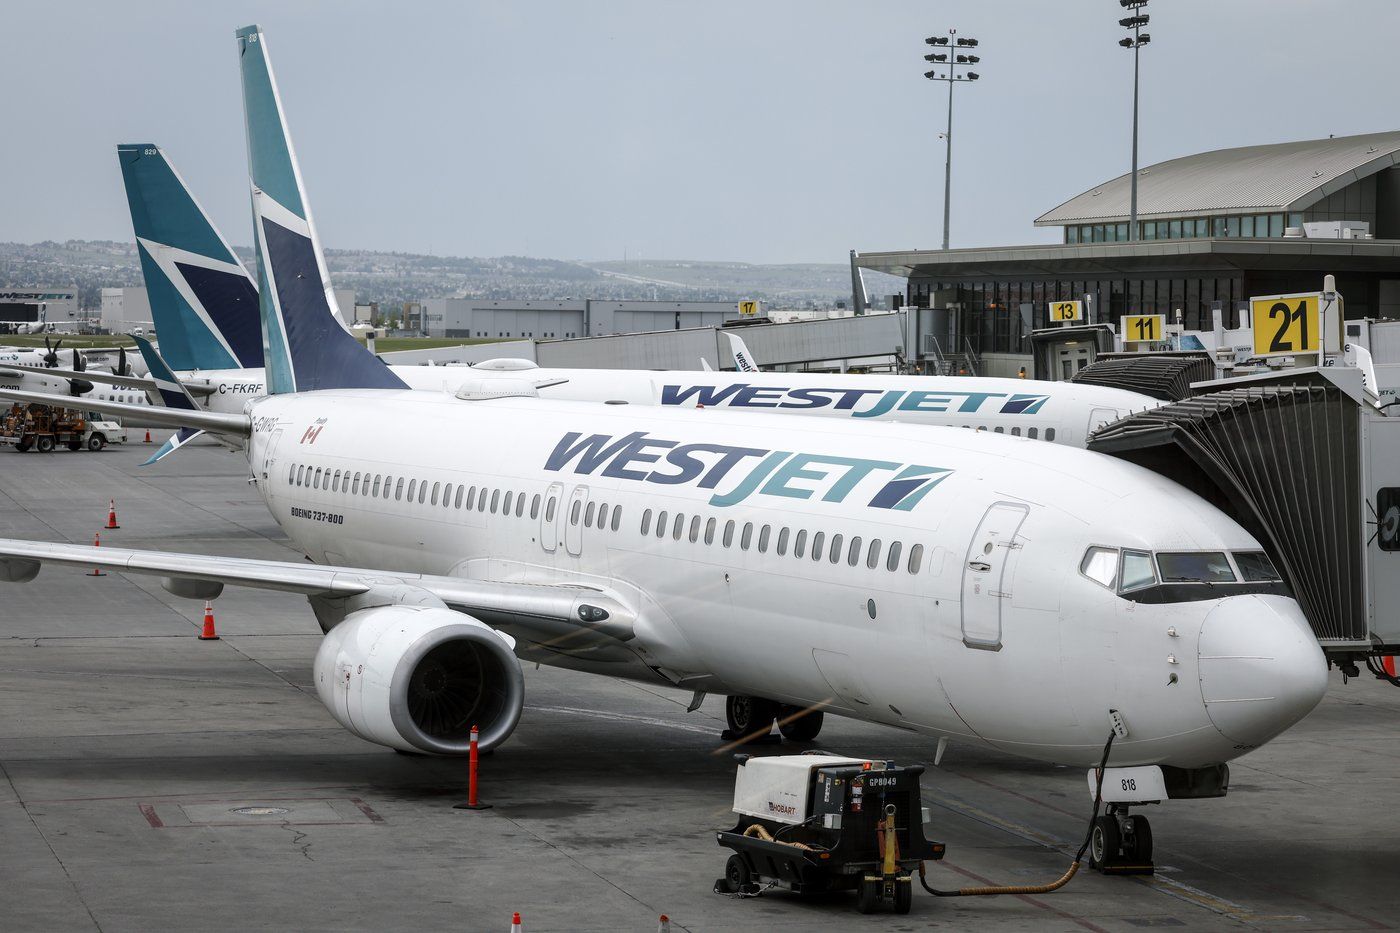 WestJet mechanics go on unexpected strike, disrupting travel ahead of the long weekend